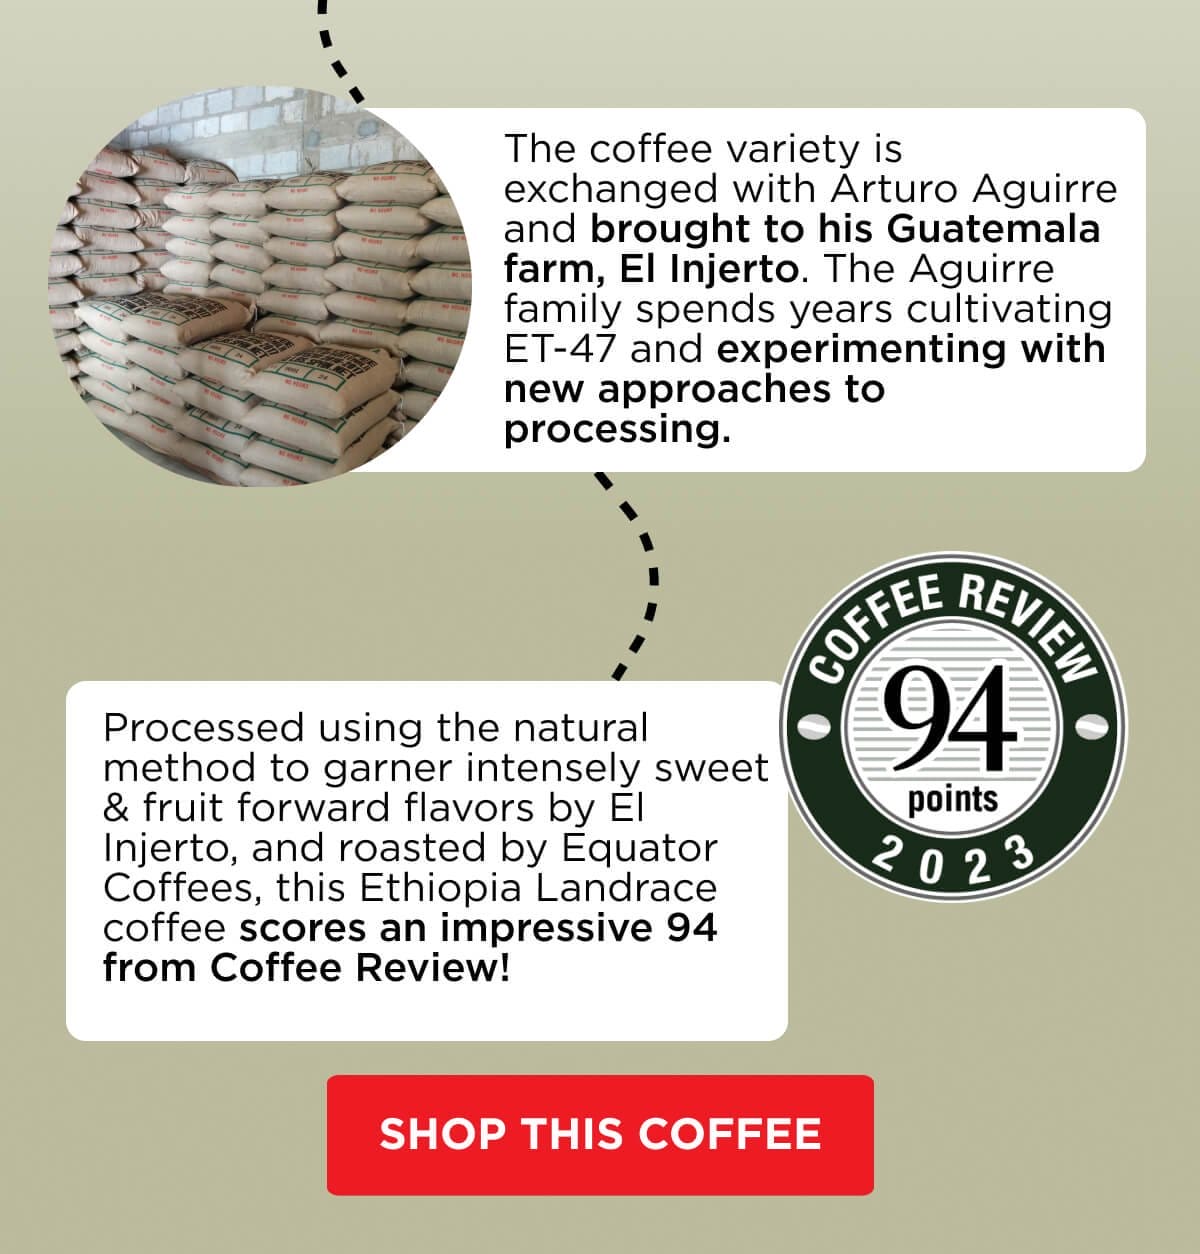 Guatemala El Injerto experiments with new approaches to processing, scoring an impressive 94 from Coffee Review!